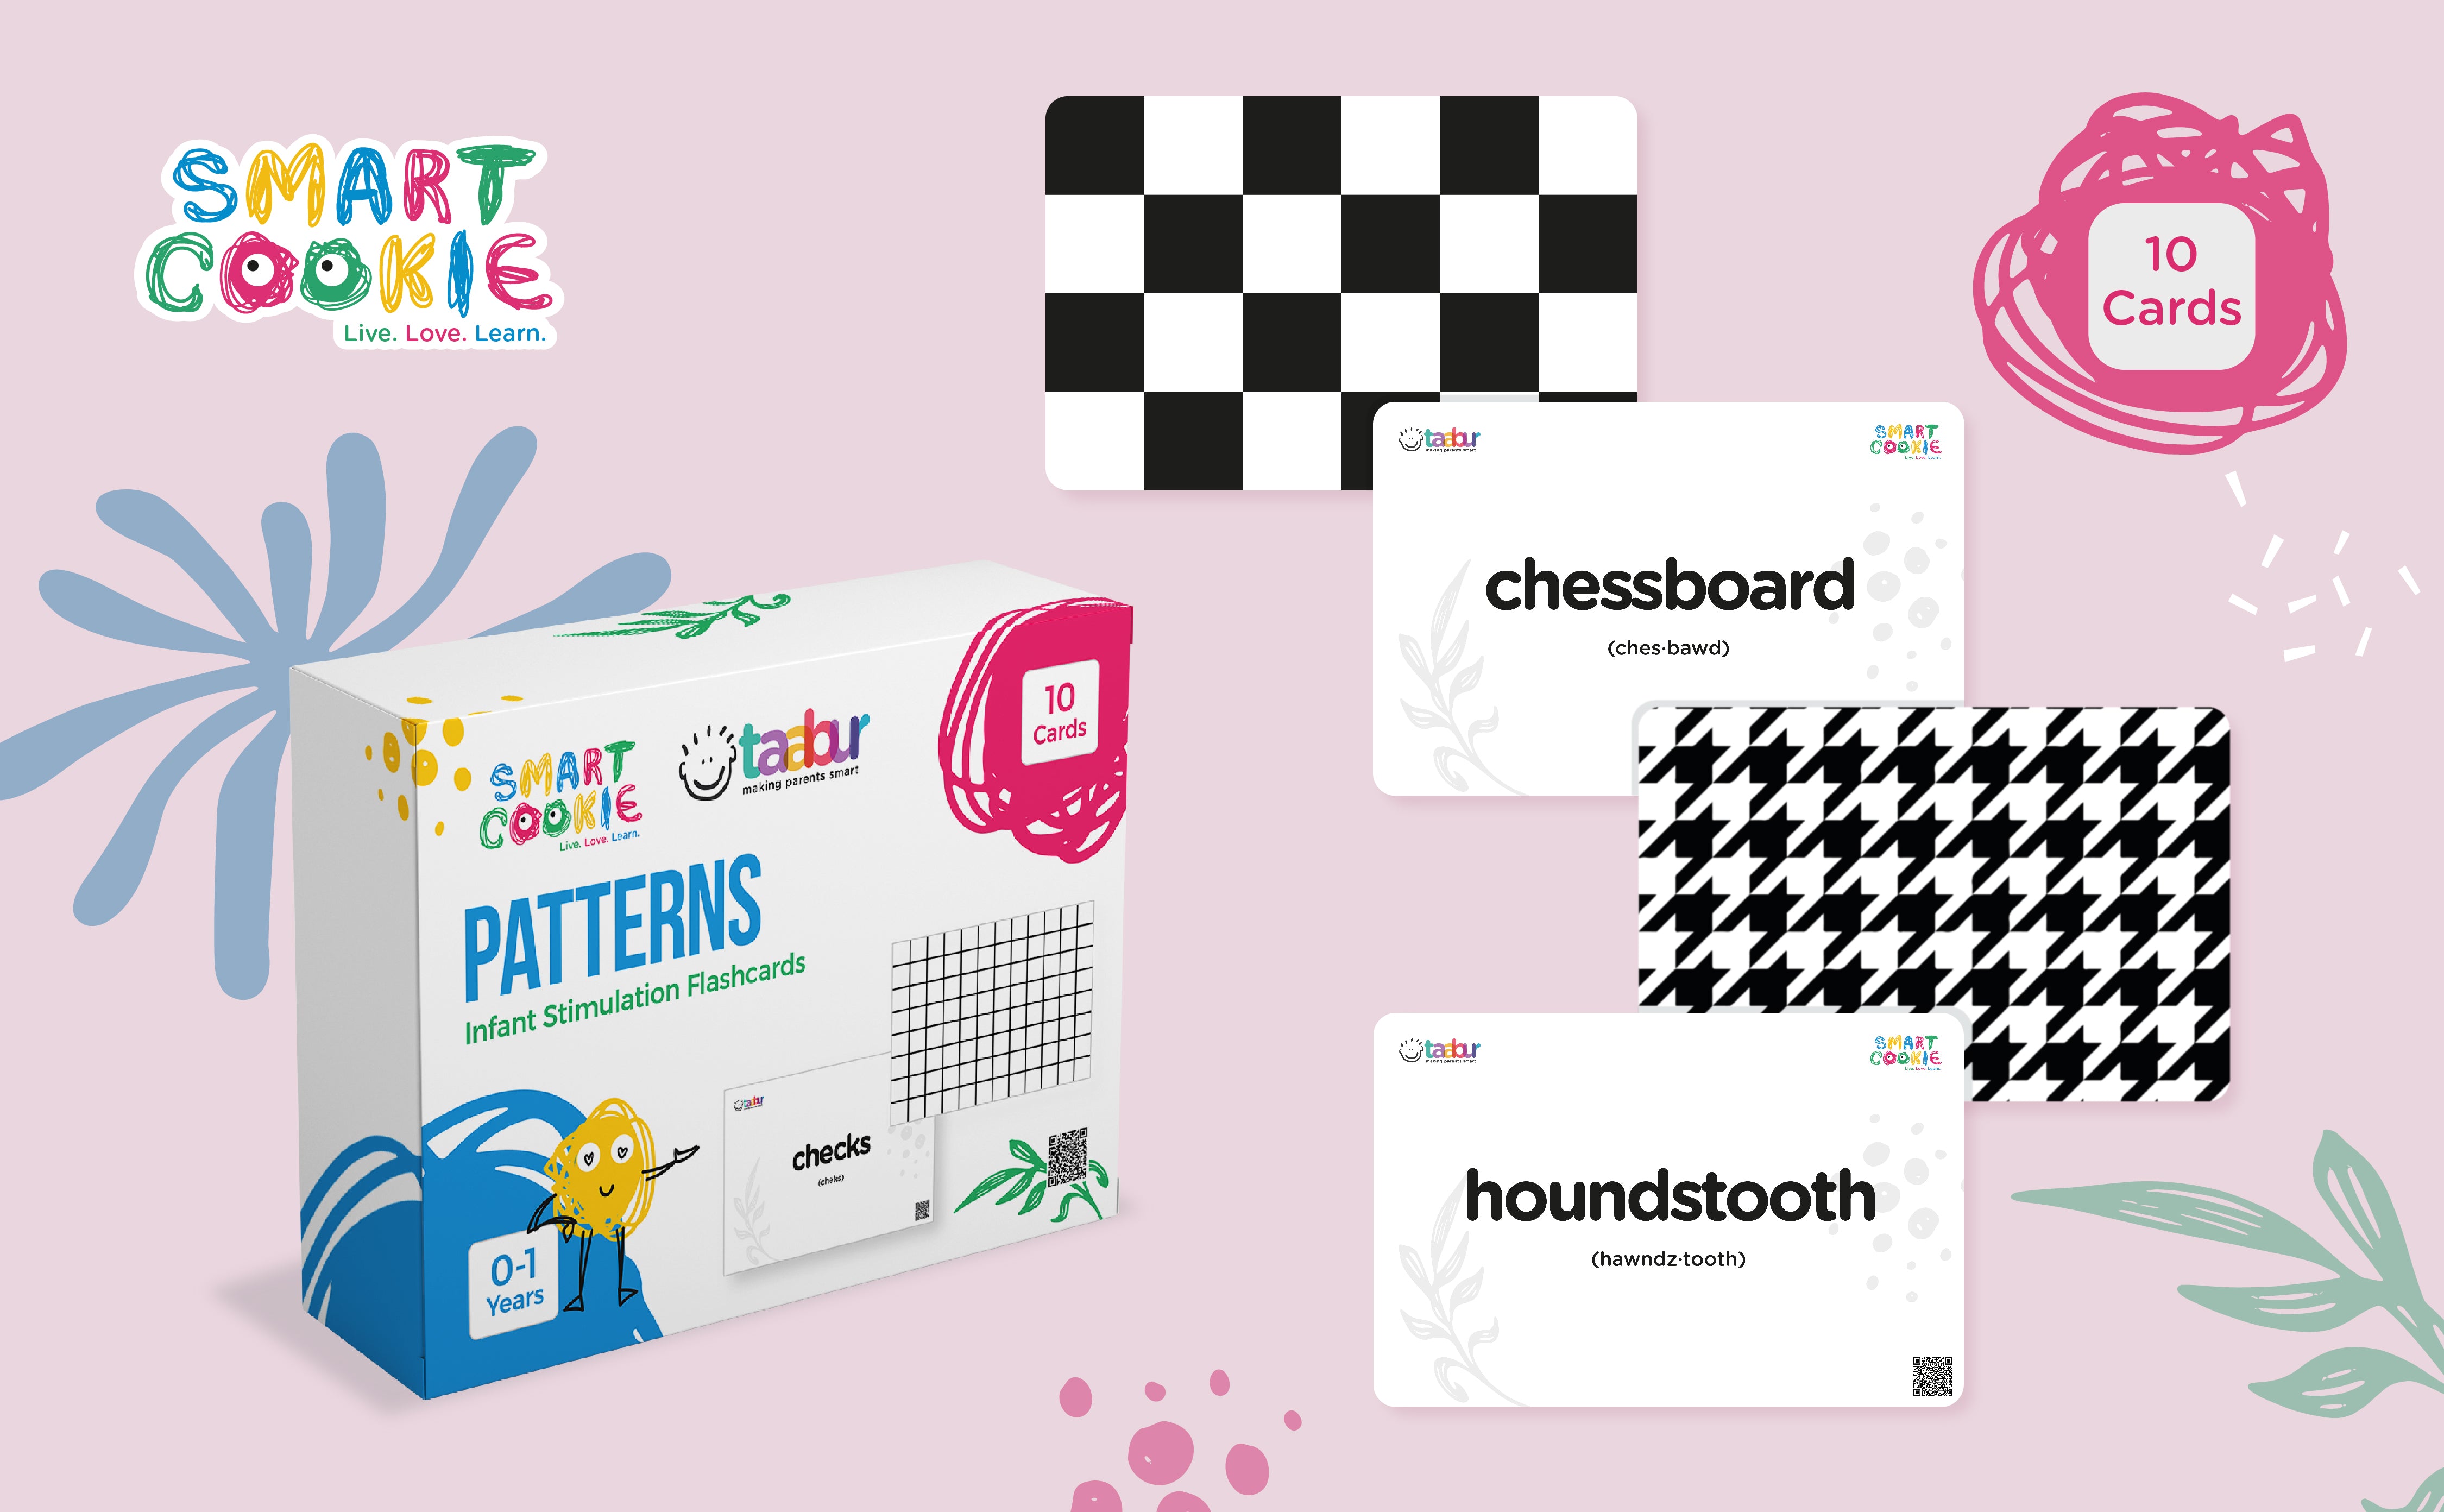 Patterns - Infant Stimulation Flashcards (Black & White) (10 Cards) - for Kids Aged 0 to 1 Years Old